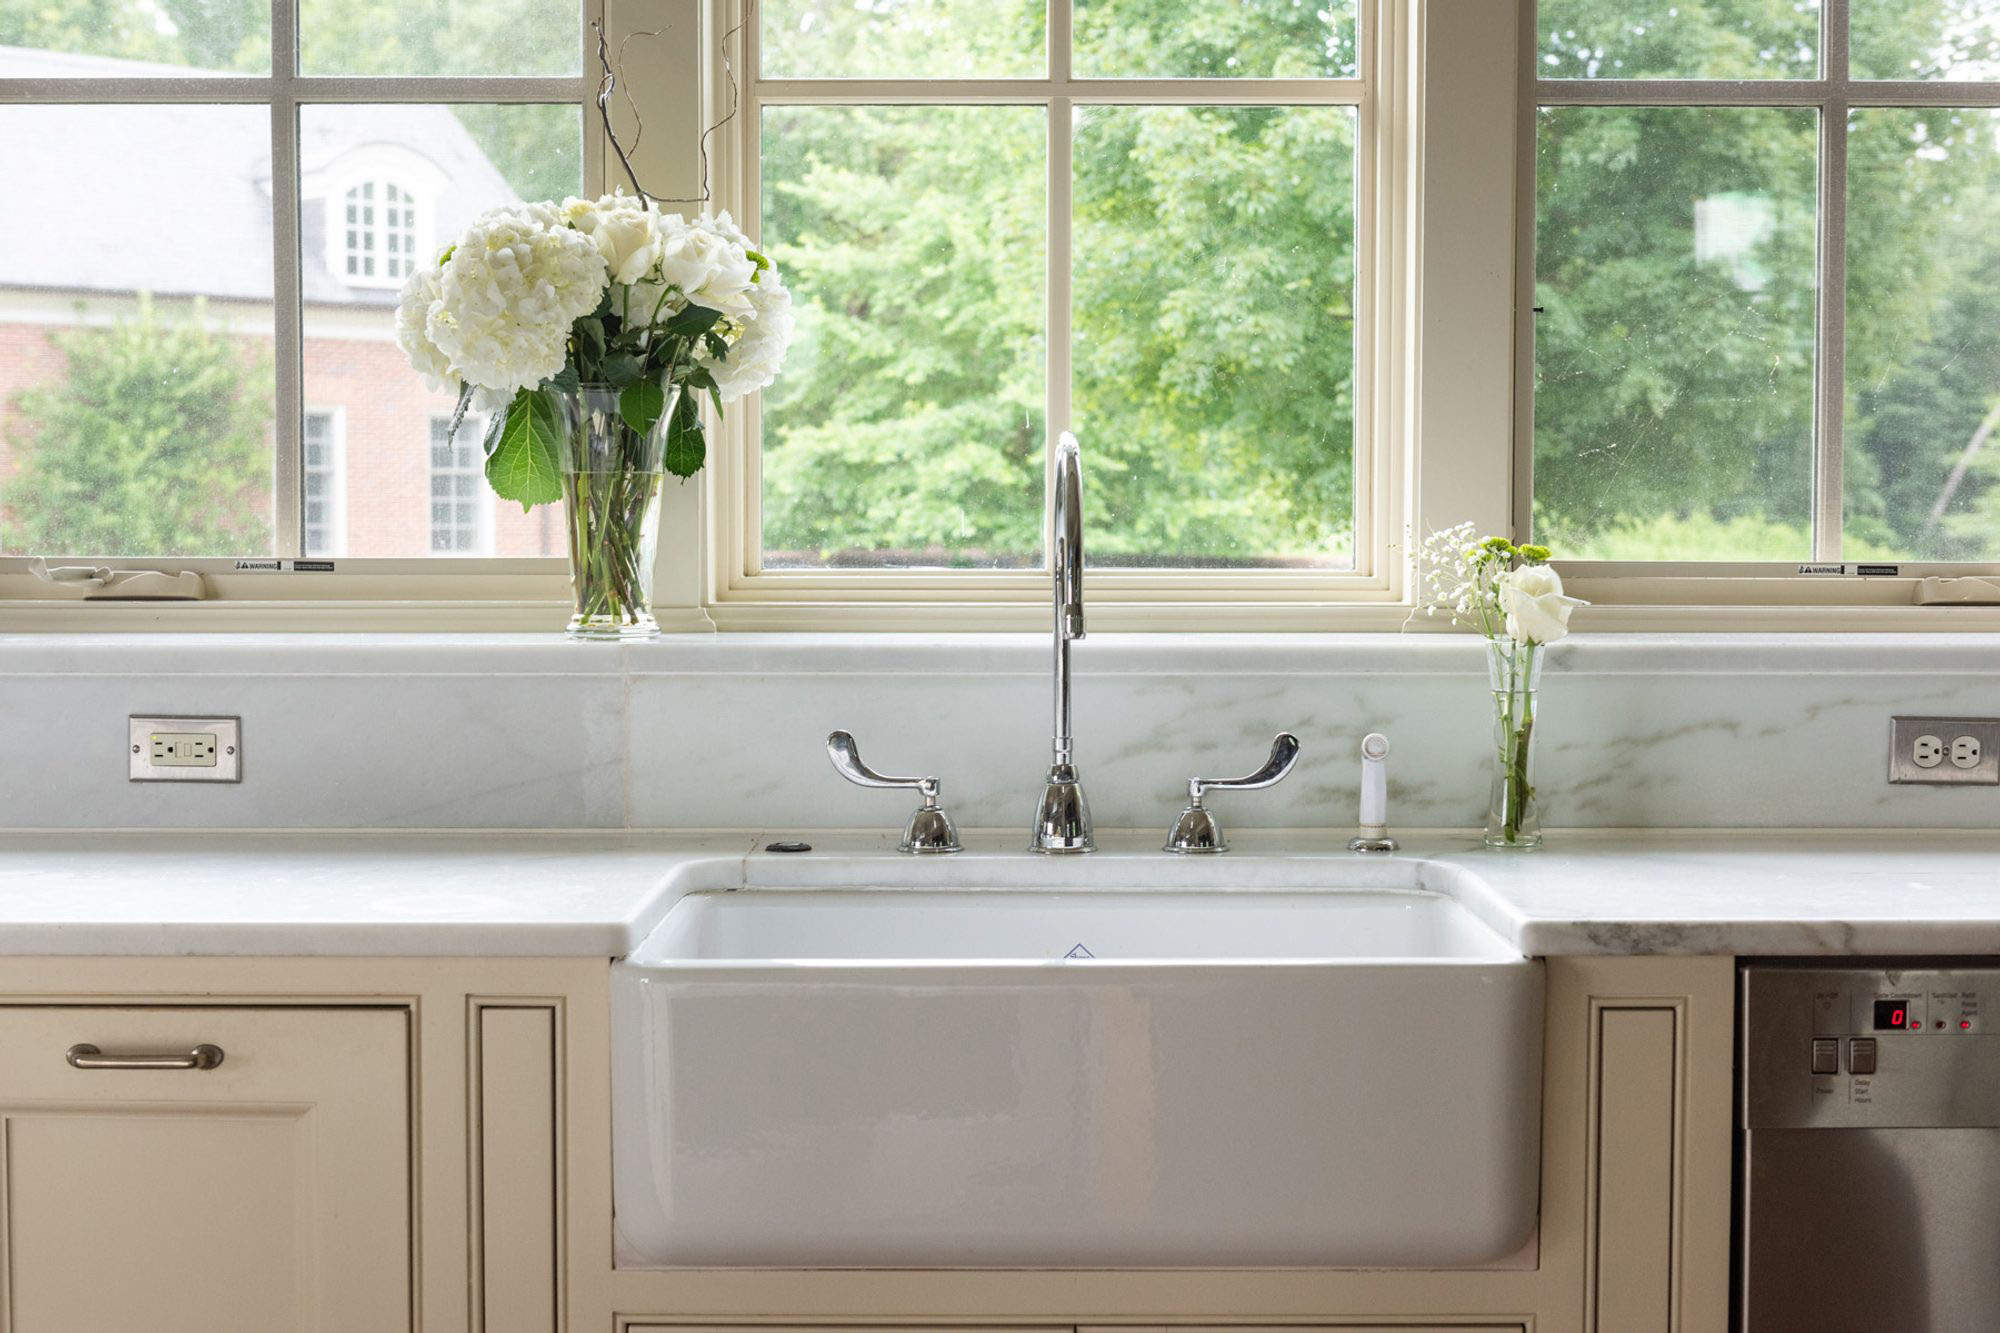 White enamel farmhouse under mount sink with cream cabinets, marble countertops and backsplash.